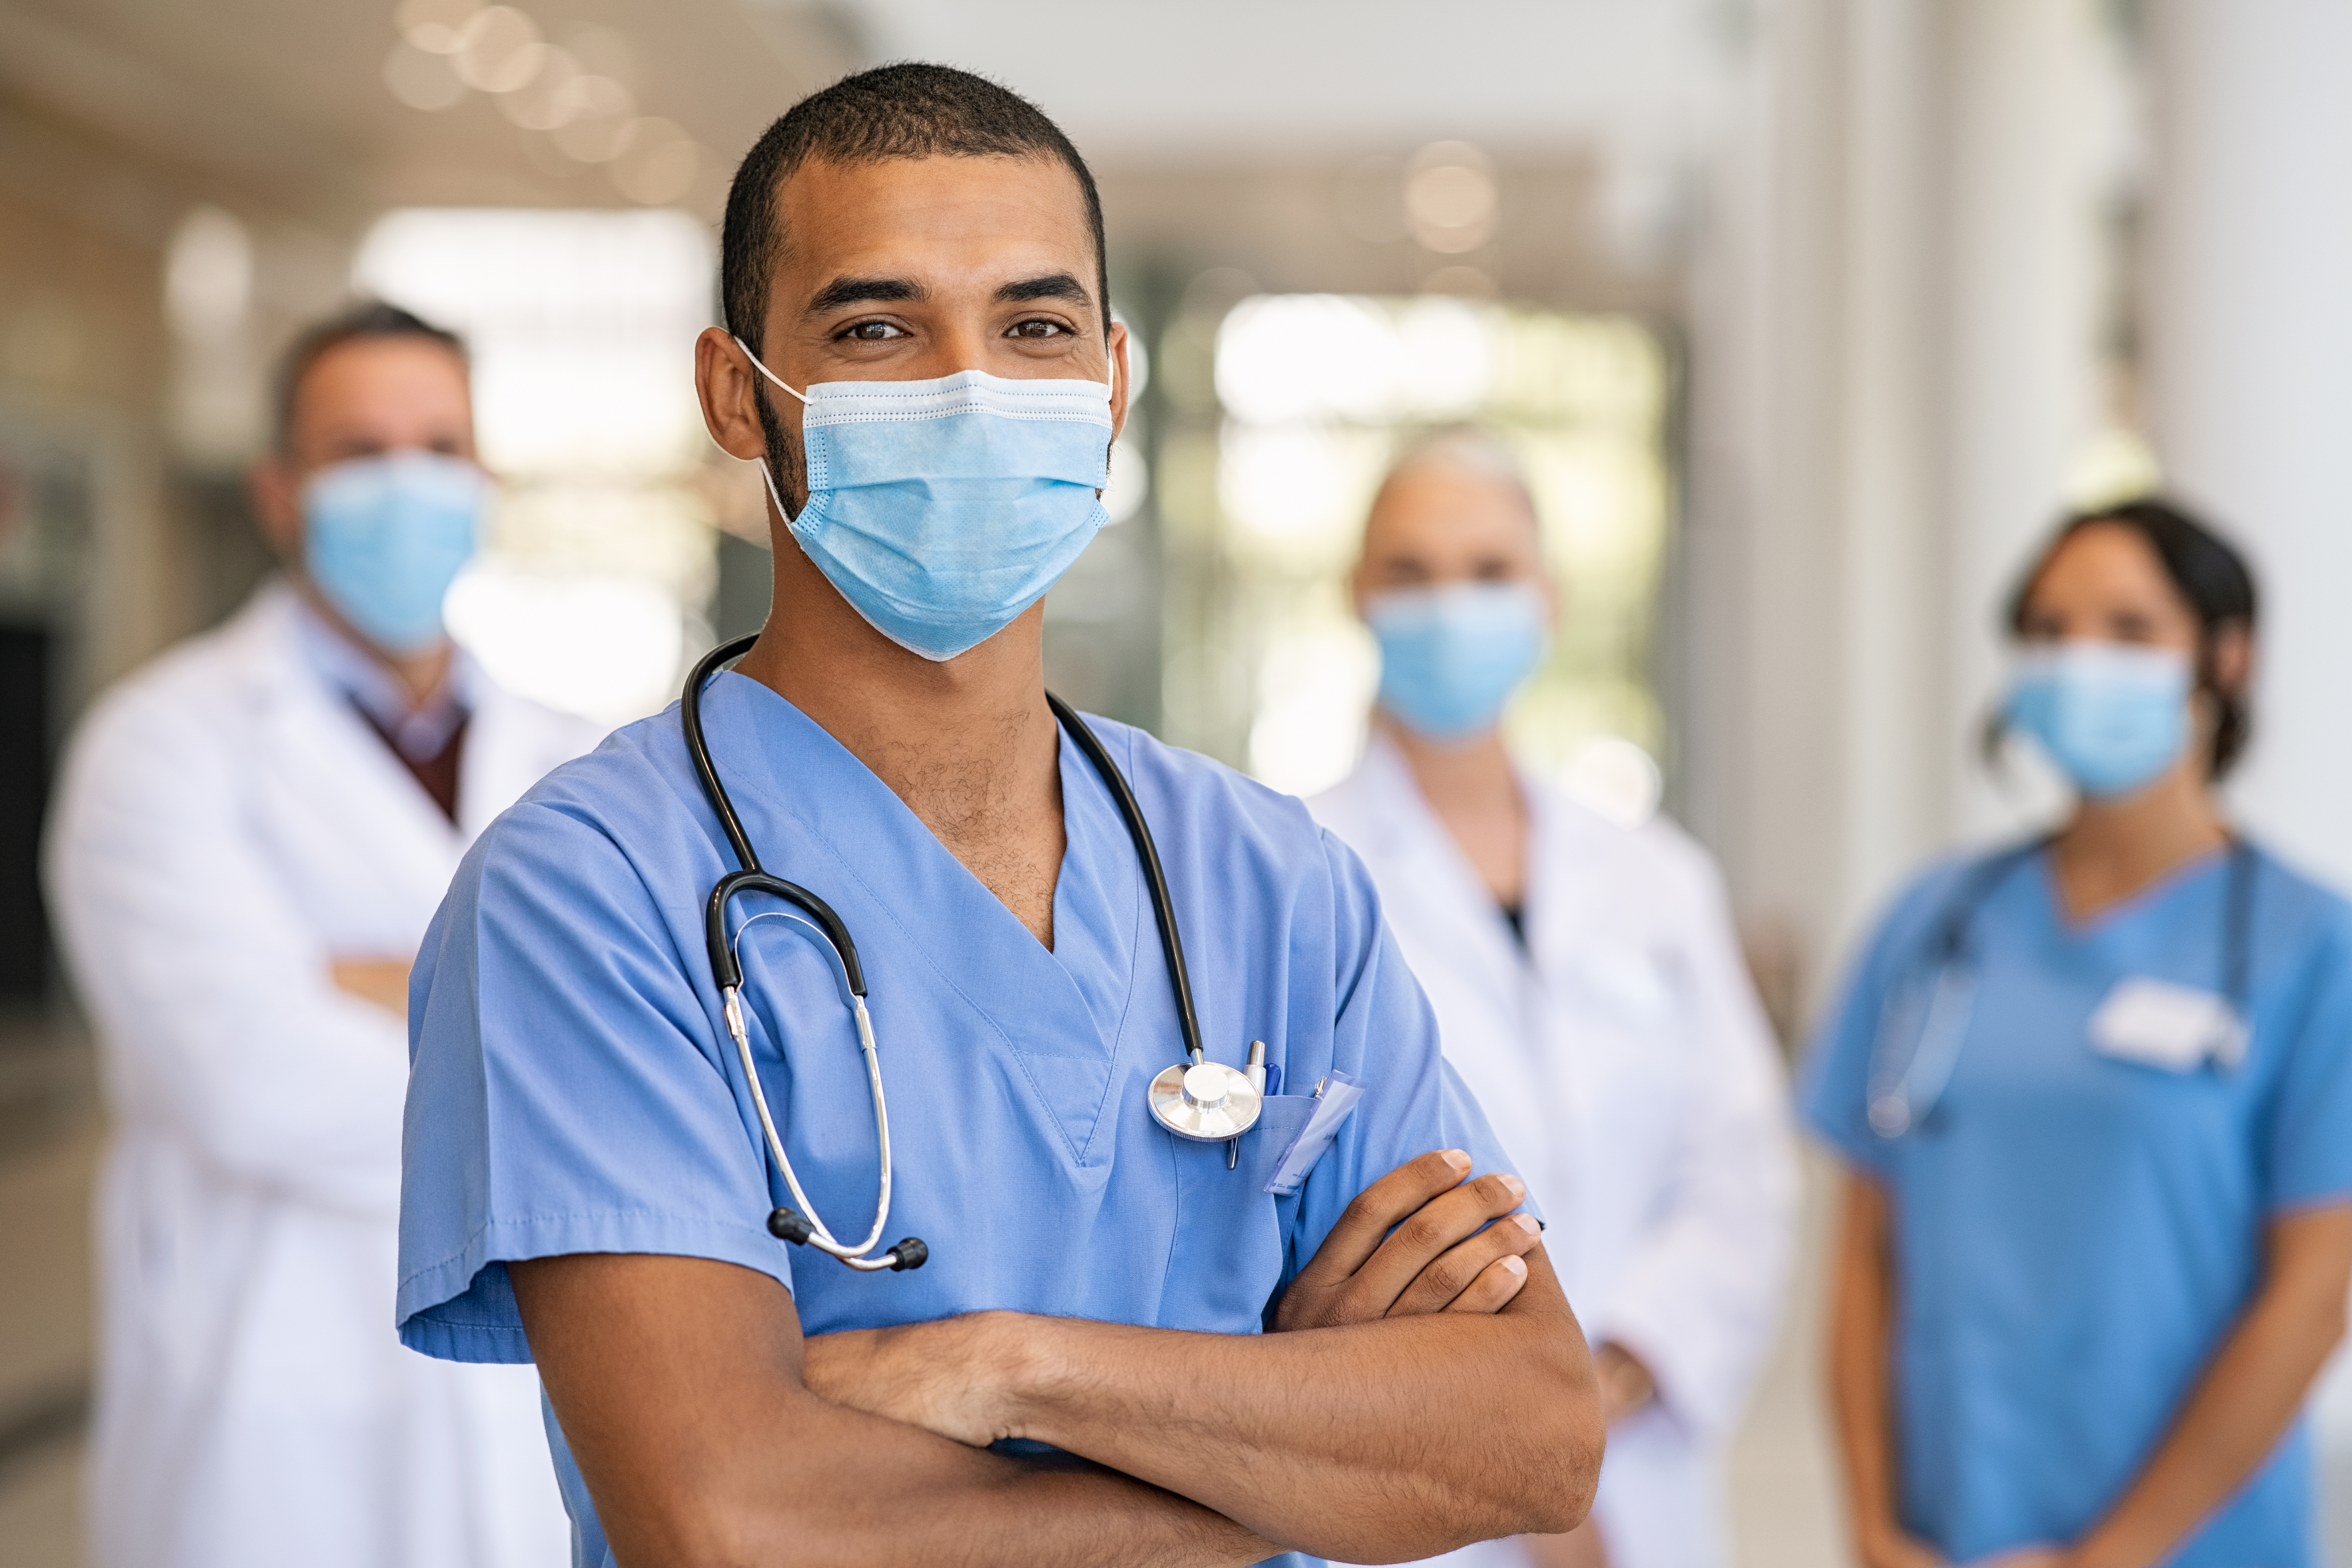 A group of masked healthcare workers